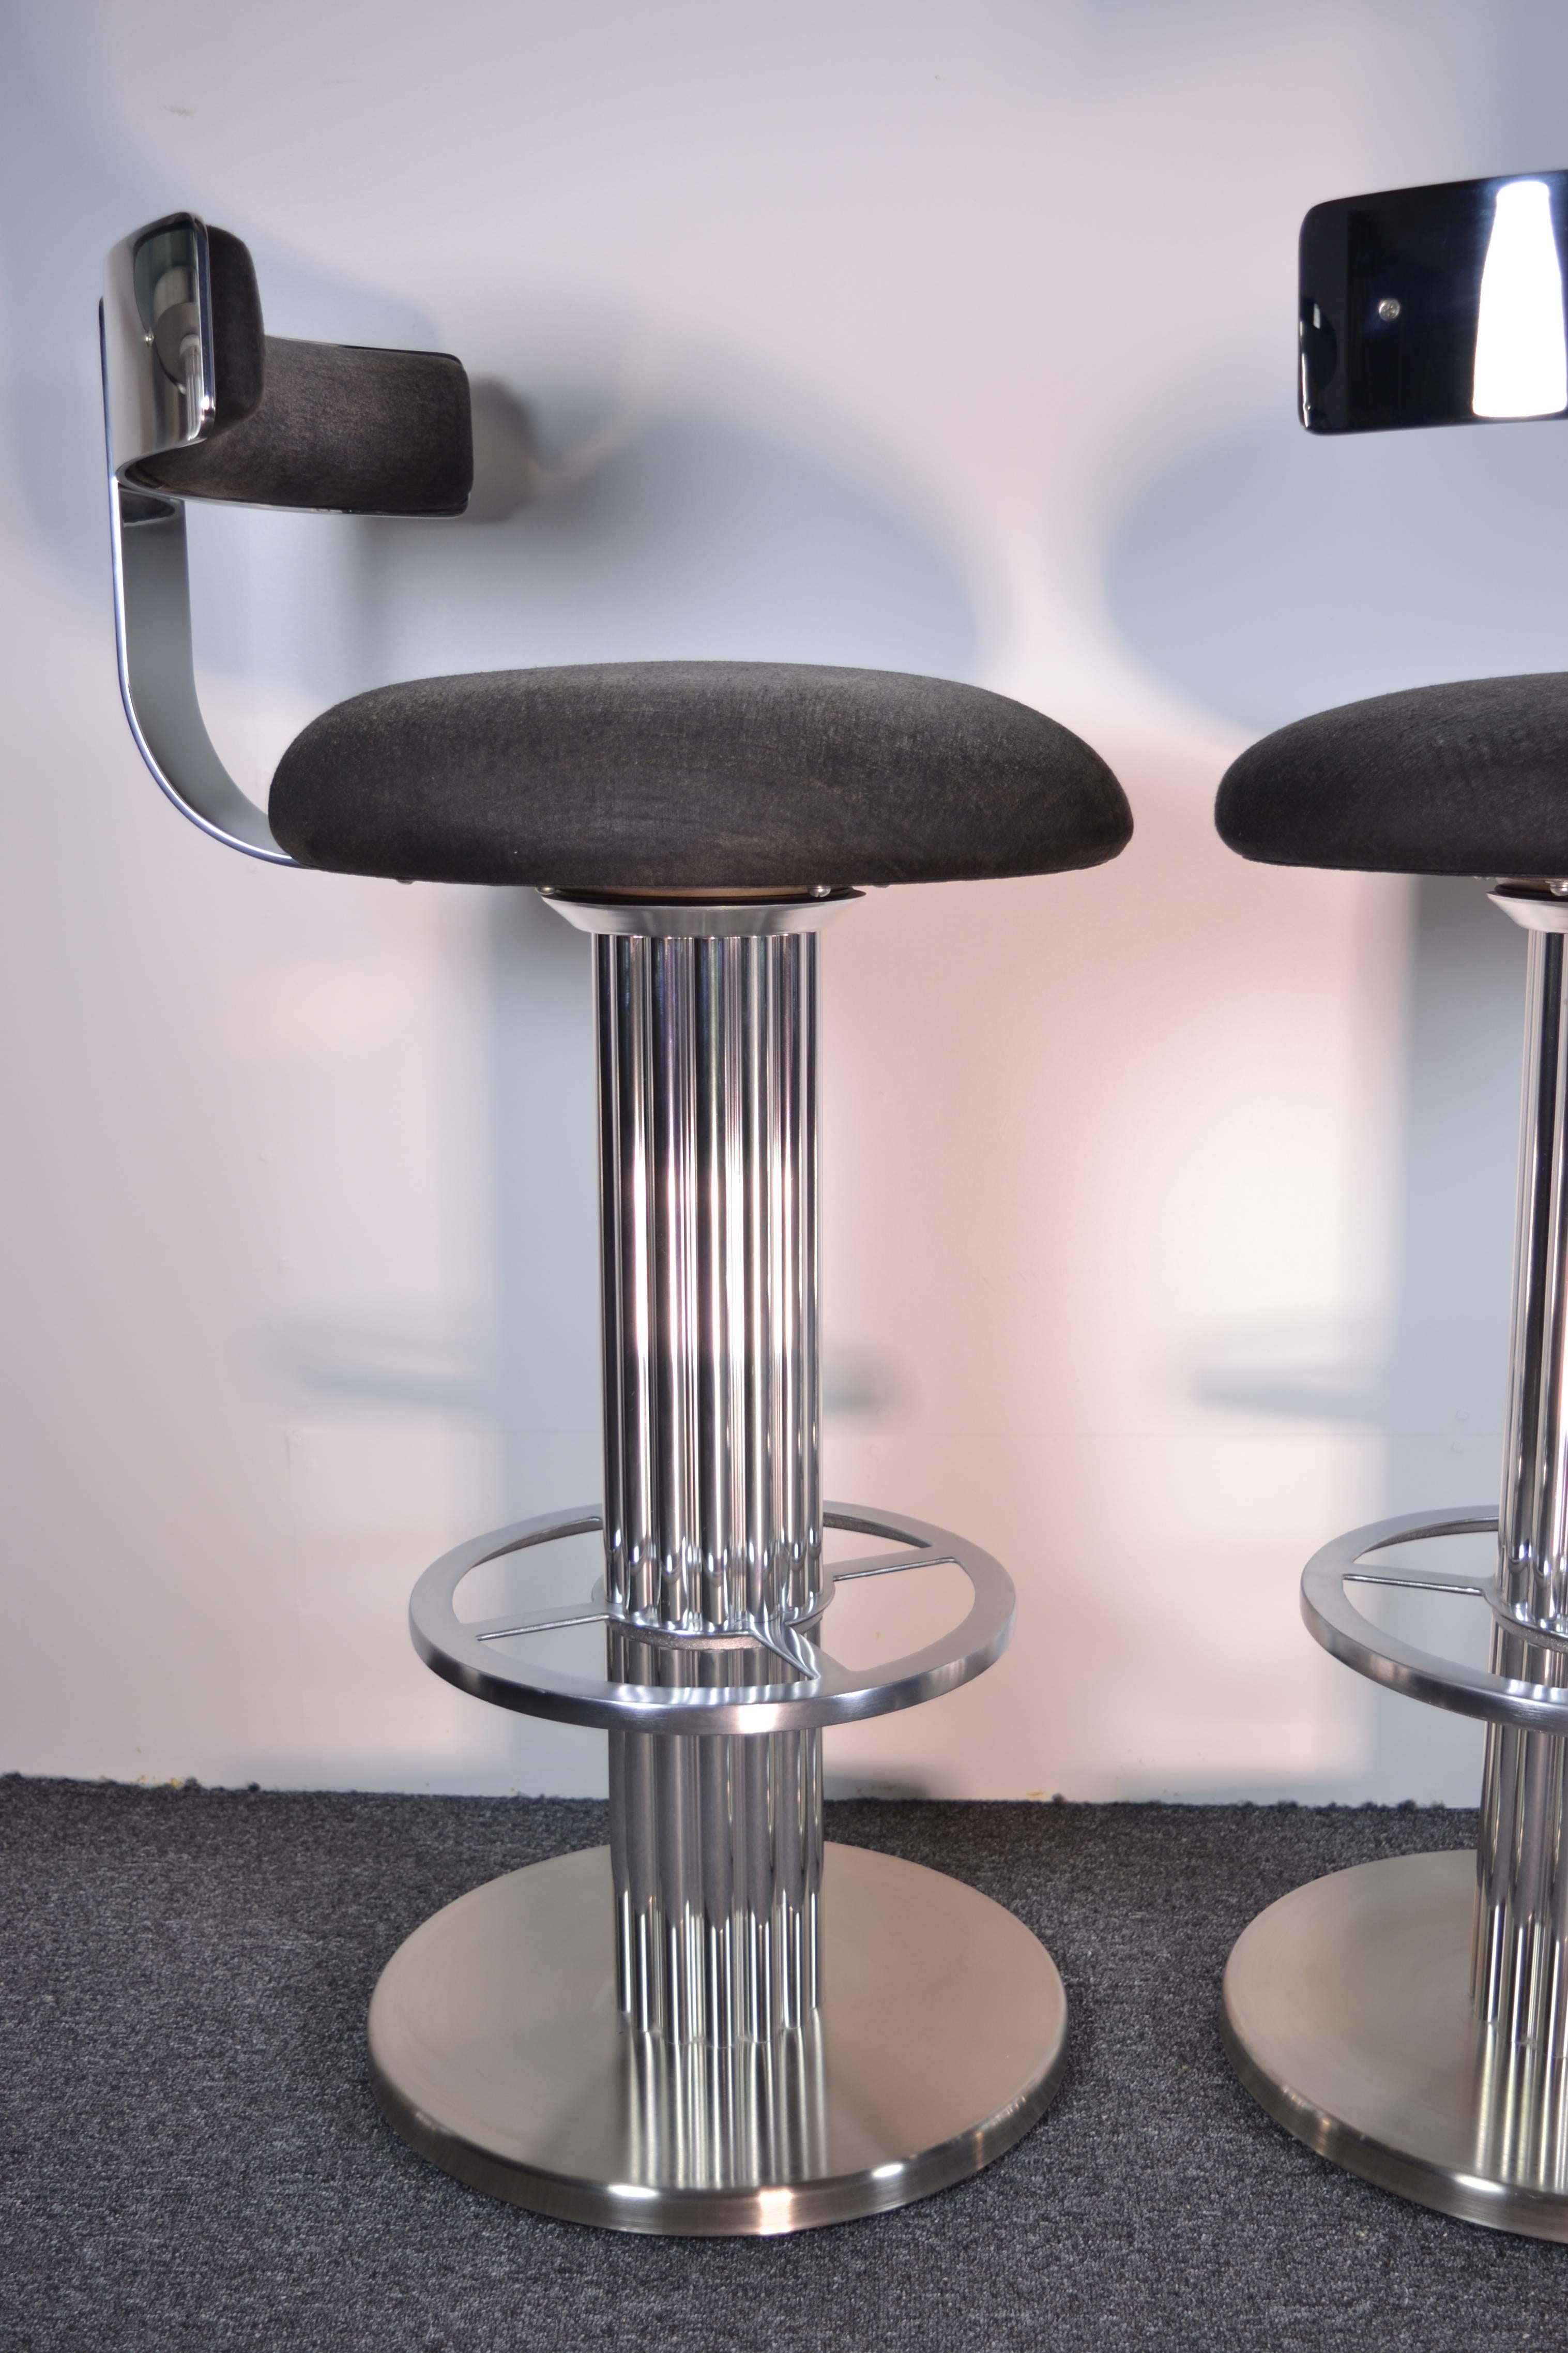 Polished steel and brushed aluminum stools by Designs for Leisure, exceptionally fine quality. Very heavy with smooth swivel motion. Excellent condition with almost no signs of wear on metal frames. Covered in faux snake printed fabric quite faded